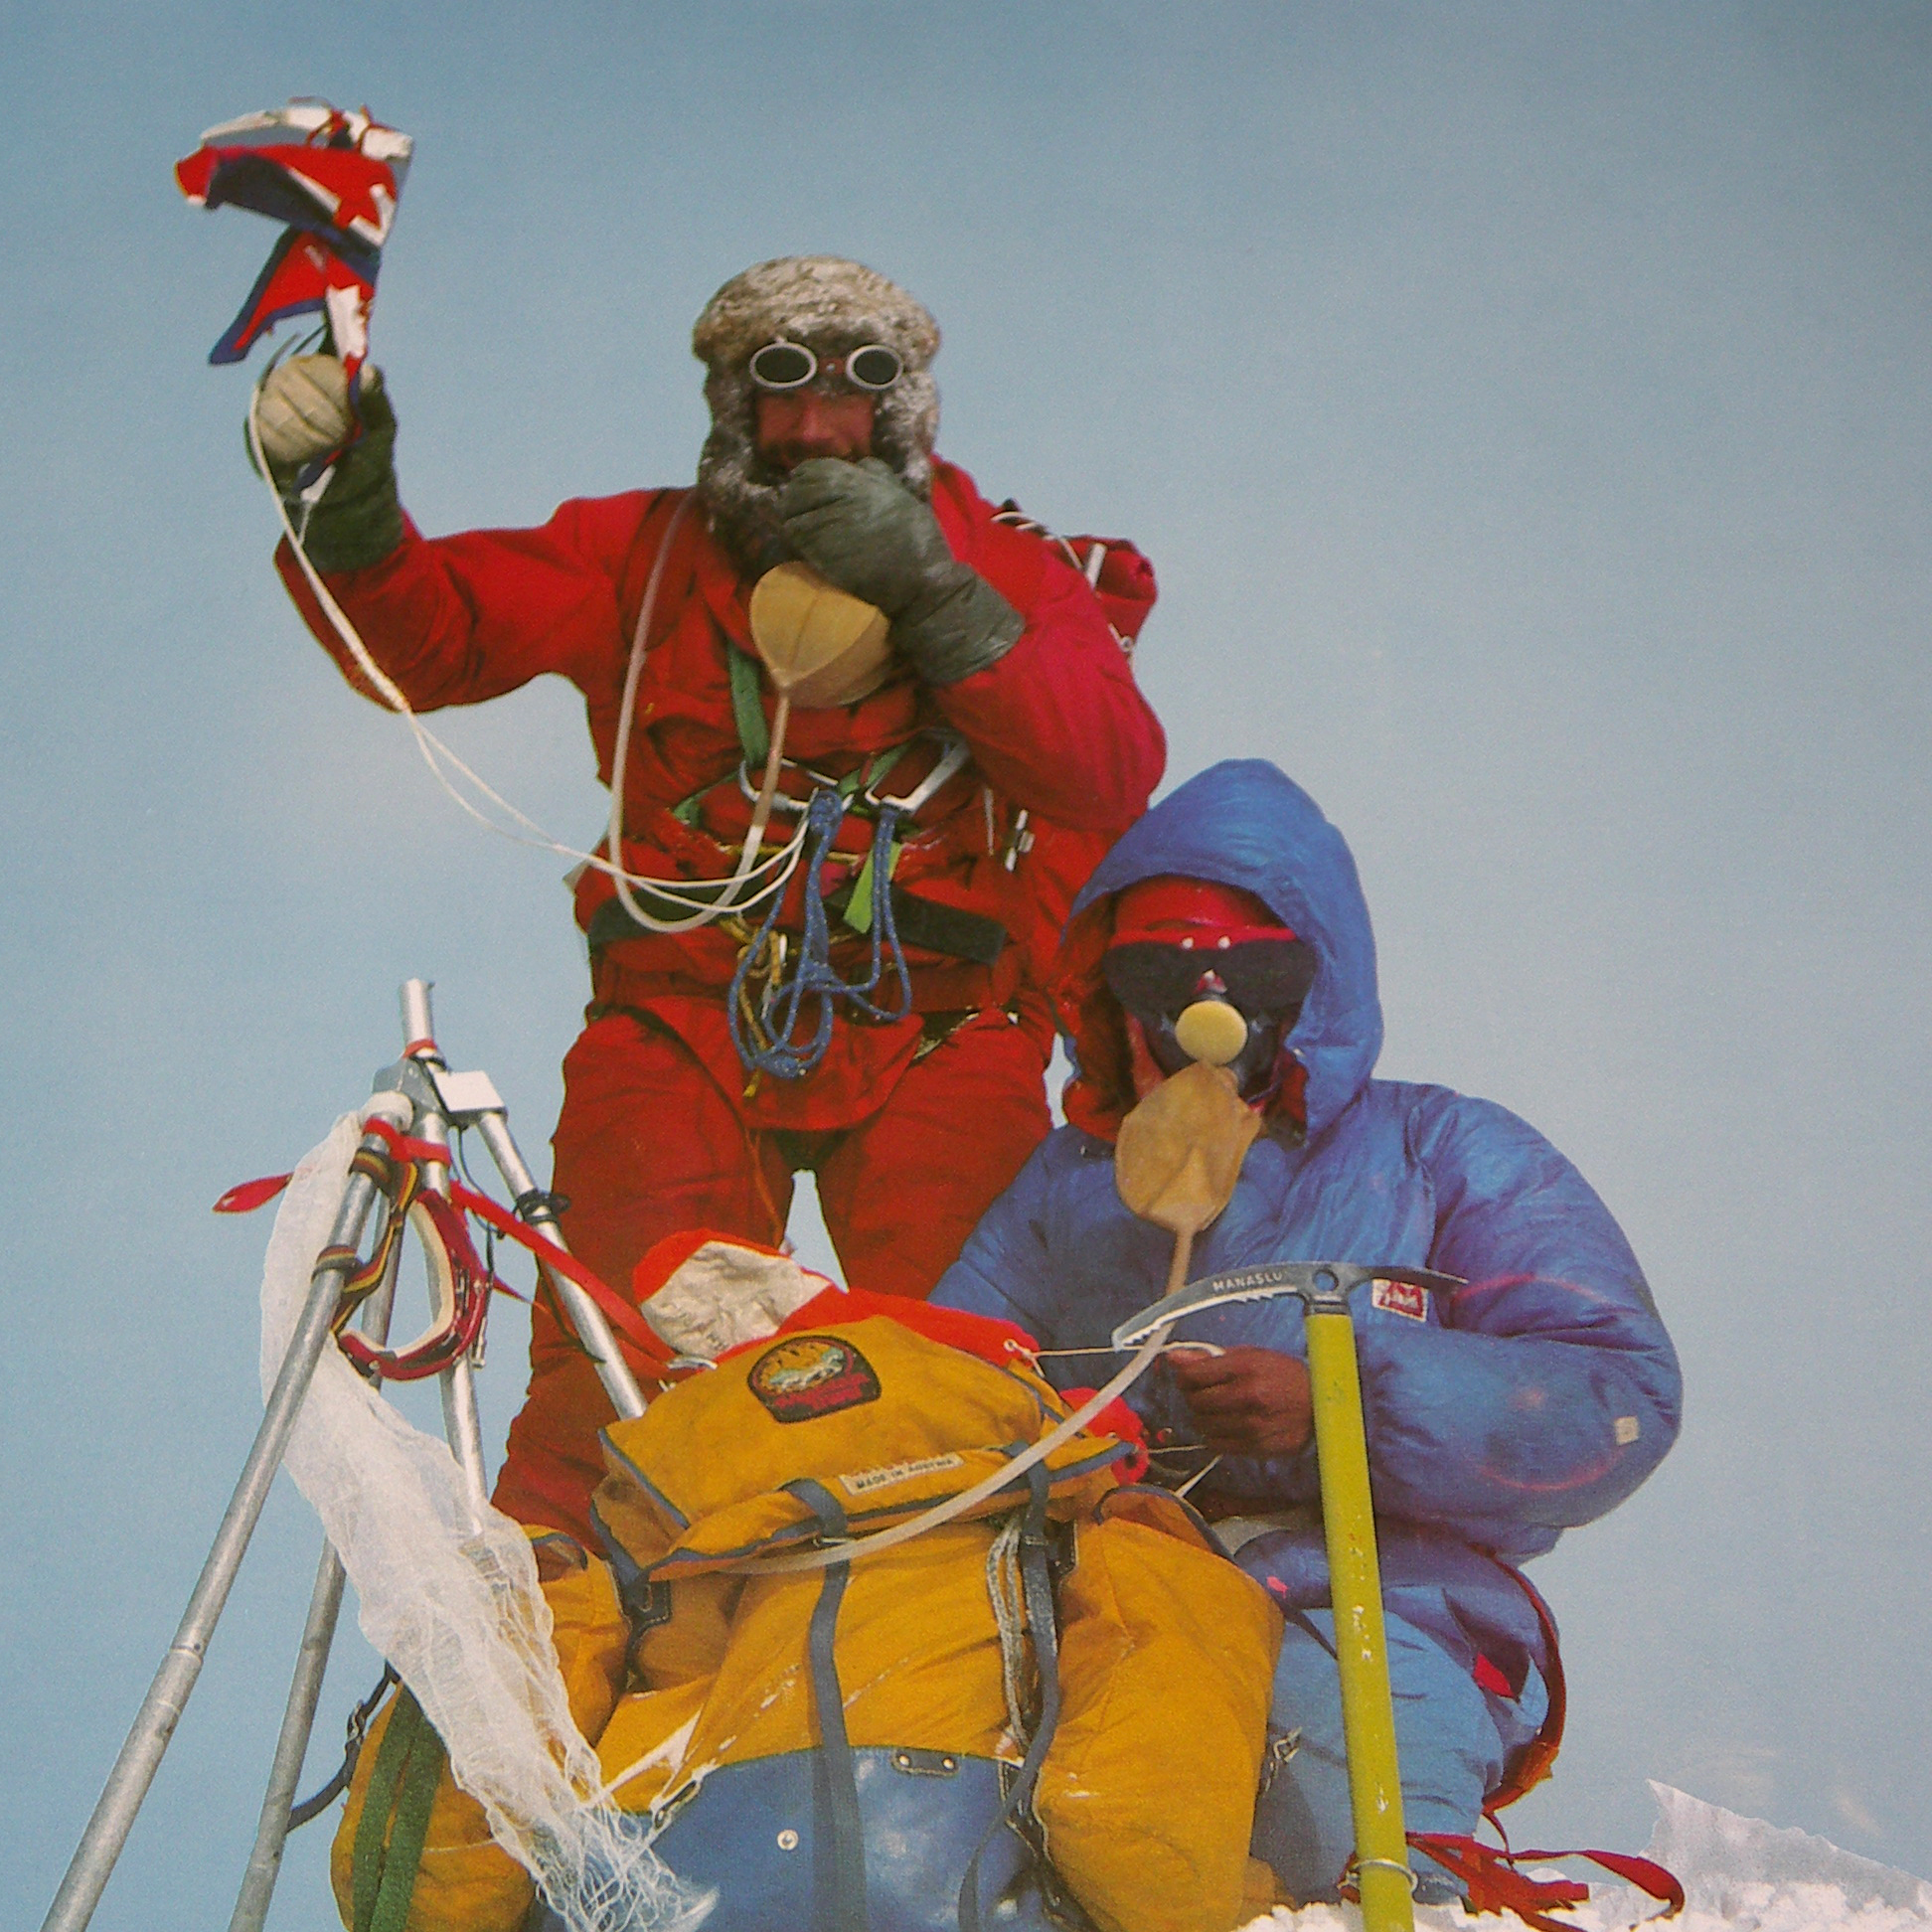 40 years since the “Slovenian Everest”